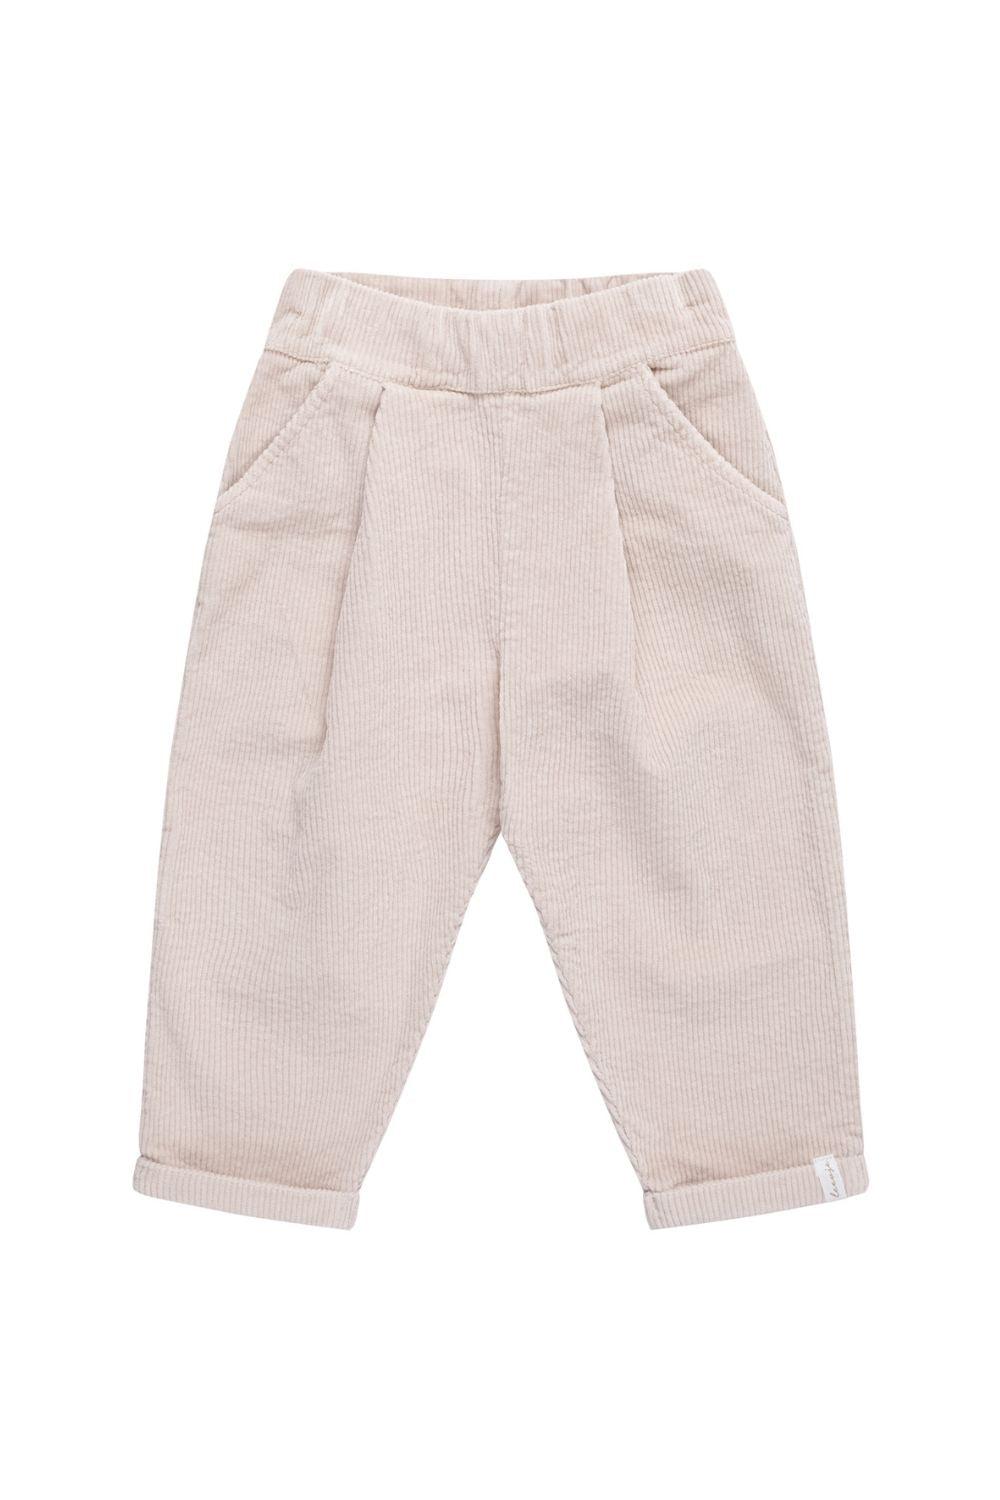 Unisex Cordhose mit Taschen 'Crystal Gray' - The Little One • Family.Concept.Store. 